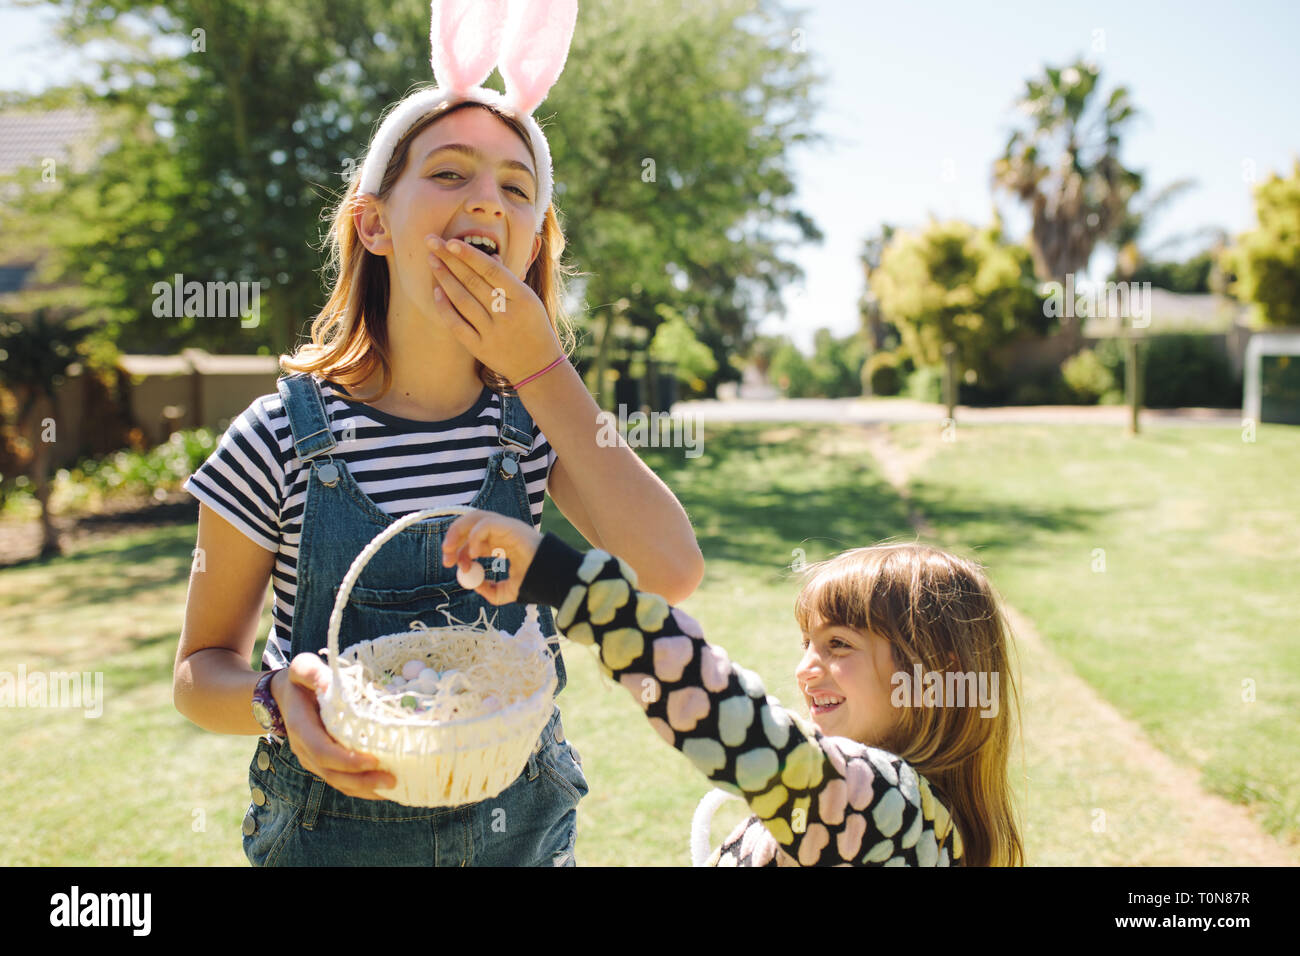 Kids eating sweets from a basket standing in a garden. Kids having fun playing in a garden on a sunny day. Stock Photo